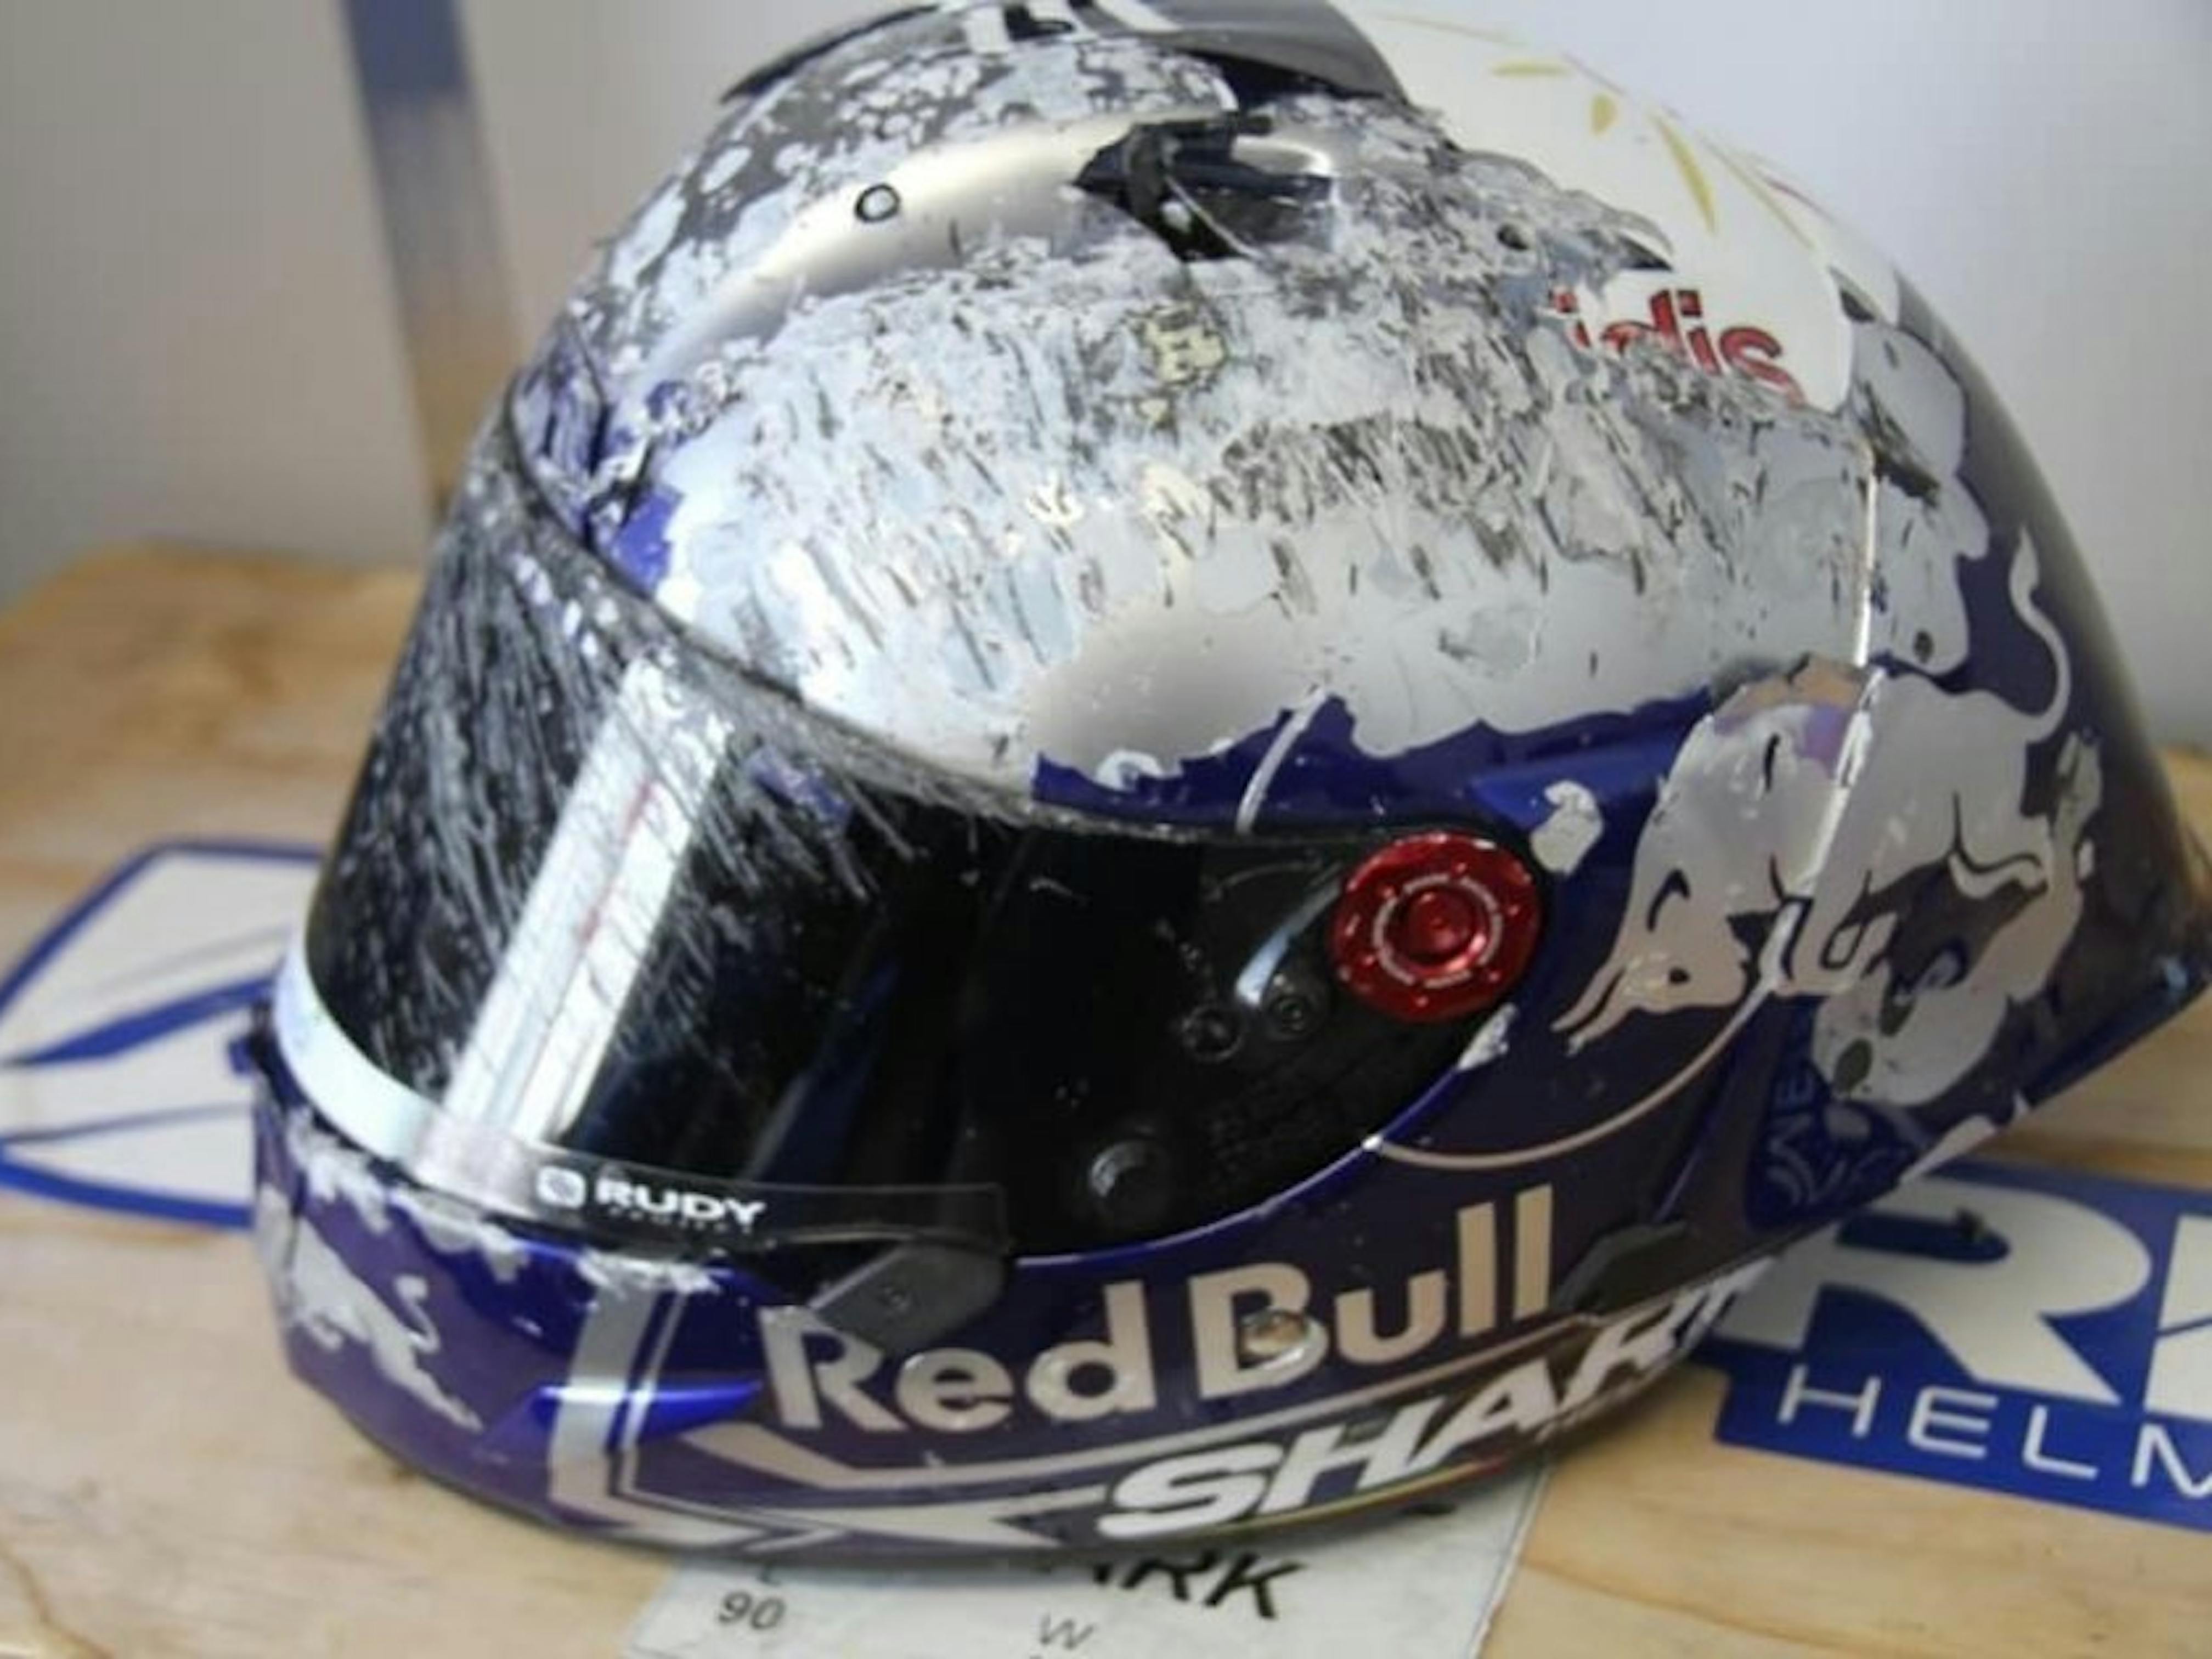 A helmet that was crashed in at 300km/h